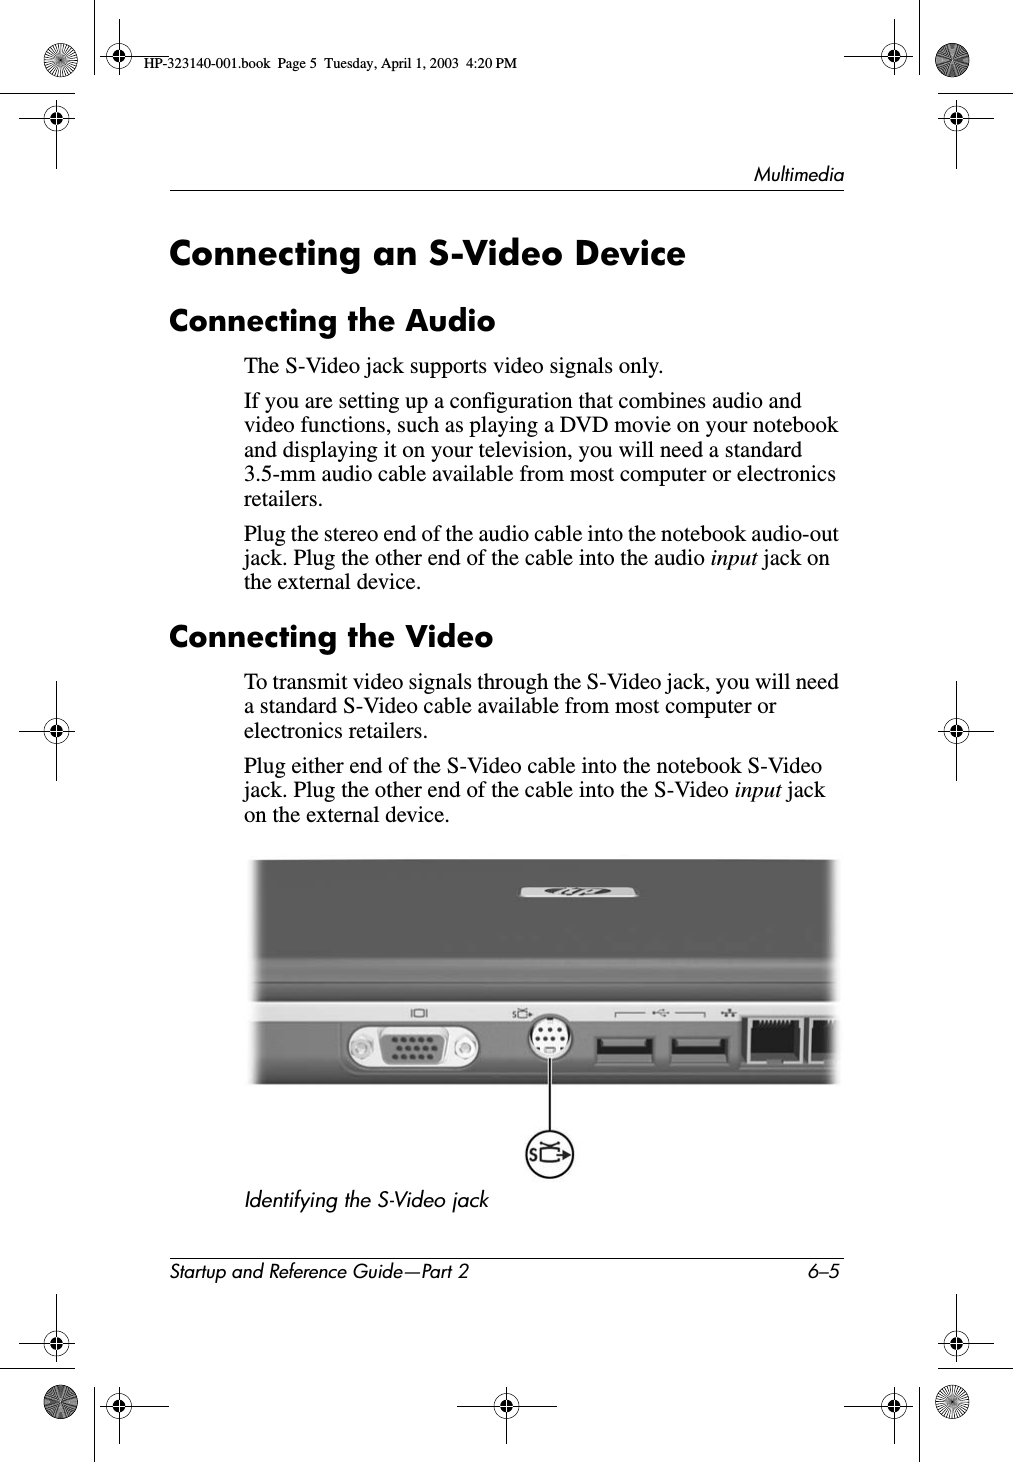 MultimediaStartup and Reference Guide—Part 2 6–5Connecting an S-Video DeviceConnecting the AudioThe S-Video jack supports video signals only. If you are setting up a configuration that combines audio and video functions, such as playing a DVD movie on your notebook and displaying it on your television, you will need a standard 3.5-mm audio cable available from most computer or electronics retailers.Plug the stereo end of the audio cable into the notebook audio-out jack. Plug the other end of the cable into the audio input jack on the external device.Connecting the VideoTo transmit video signals through the S-Video jack, you will need a standard S-Video cable available from most computer or electronics retailers. Plug either end of the S-Video cable into the notebook S-Video jack. Plug the other end of the cable into the S-Video input jack on the external device.Identifying the S-Video jackHP-323140-001.book  Page 5  Tuesday, April 1, 2003  4:20 PM